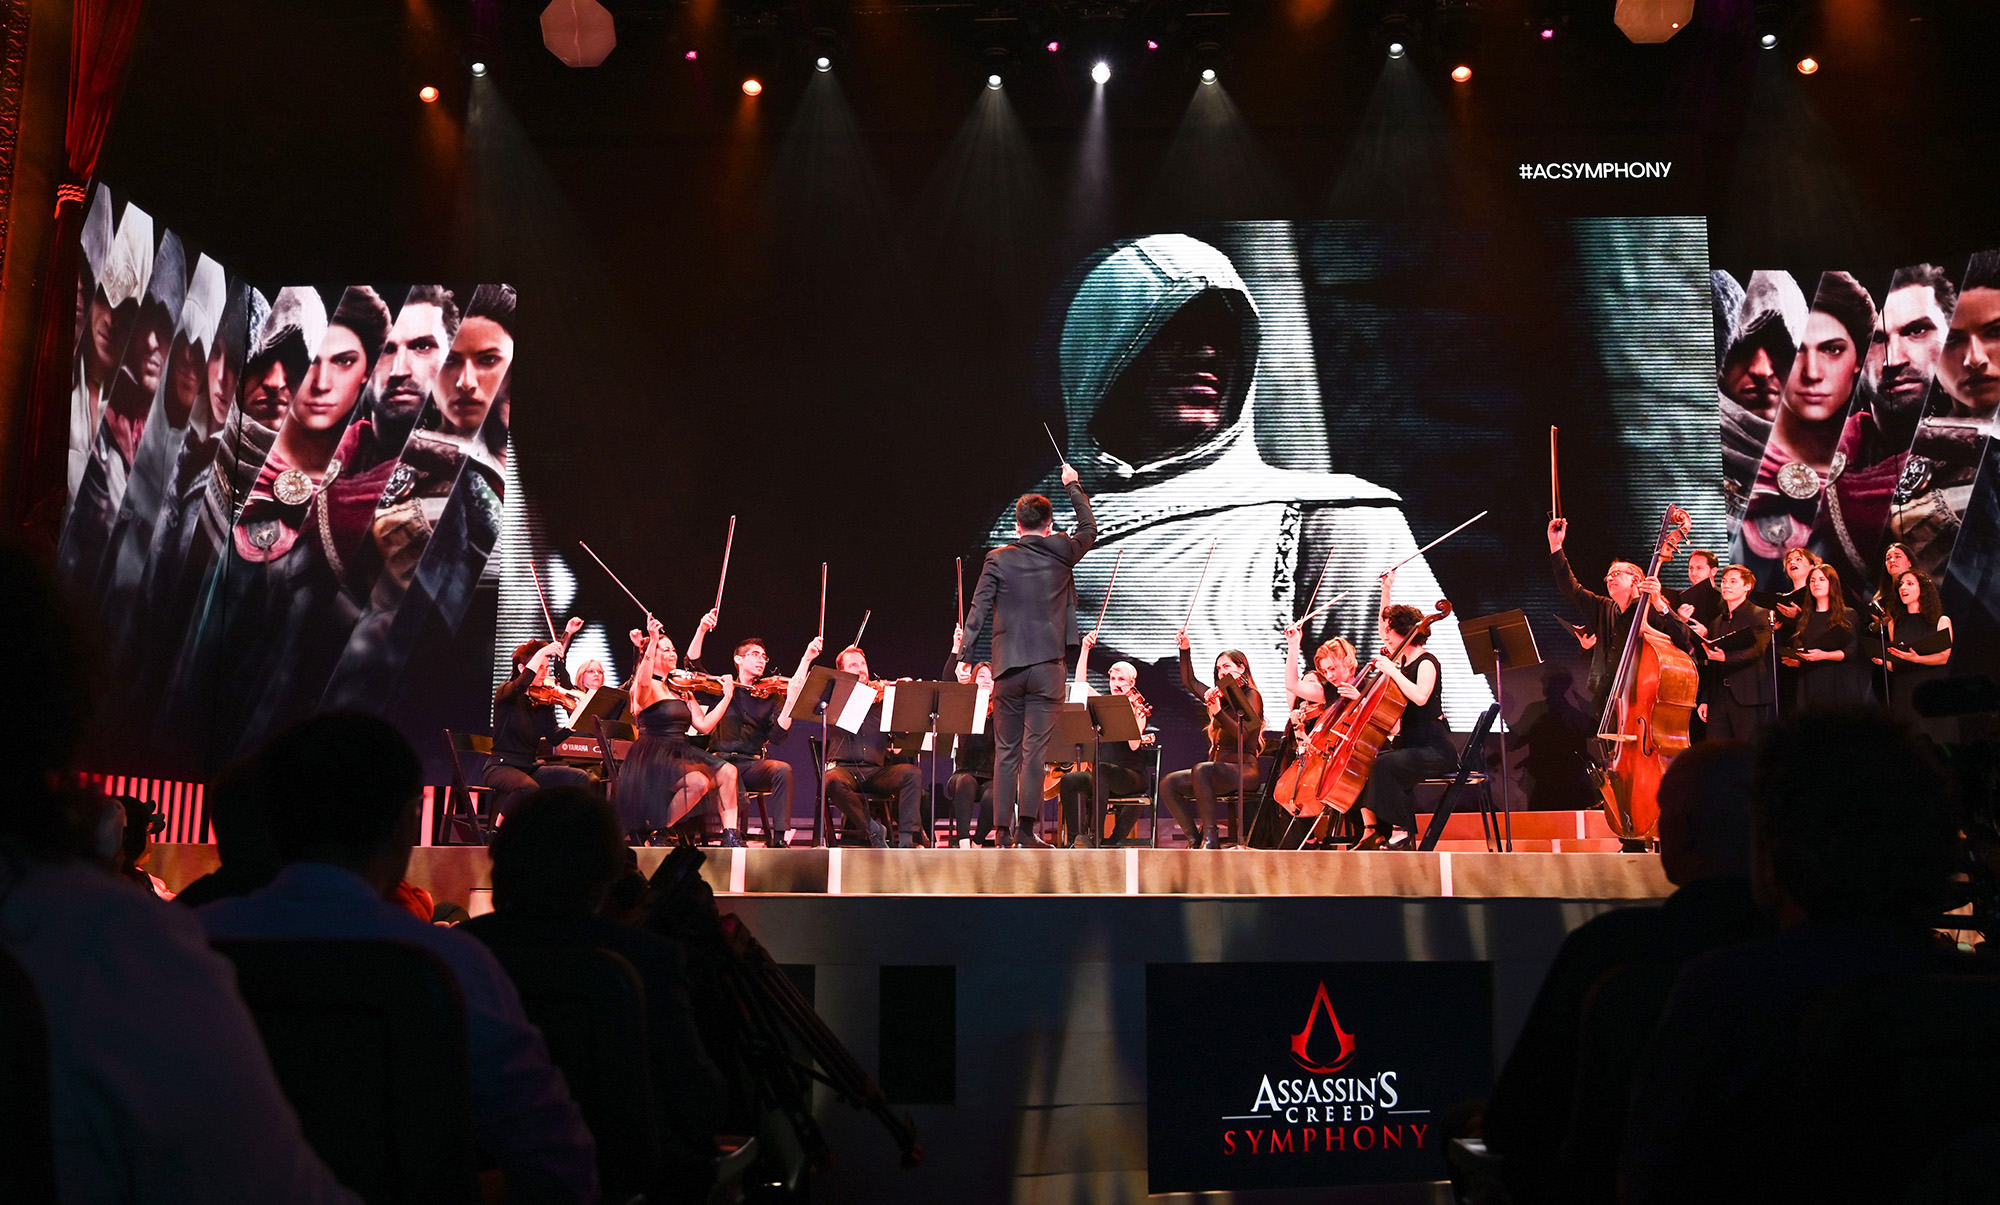 Assassin's Creed Valhalla: Ubisoft Released a Good Game in a Bad Year -  Bloomberg